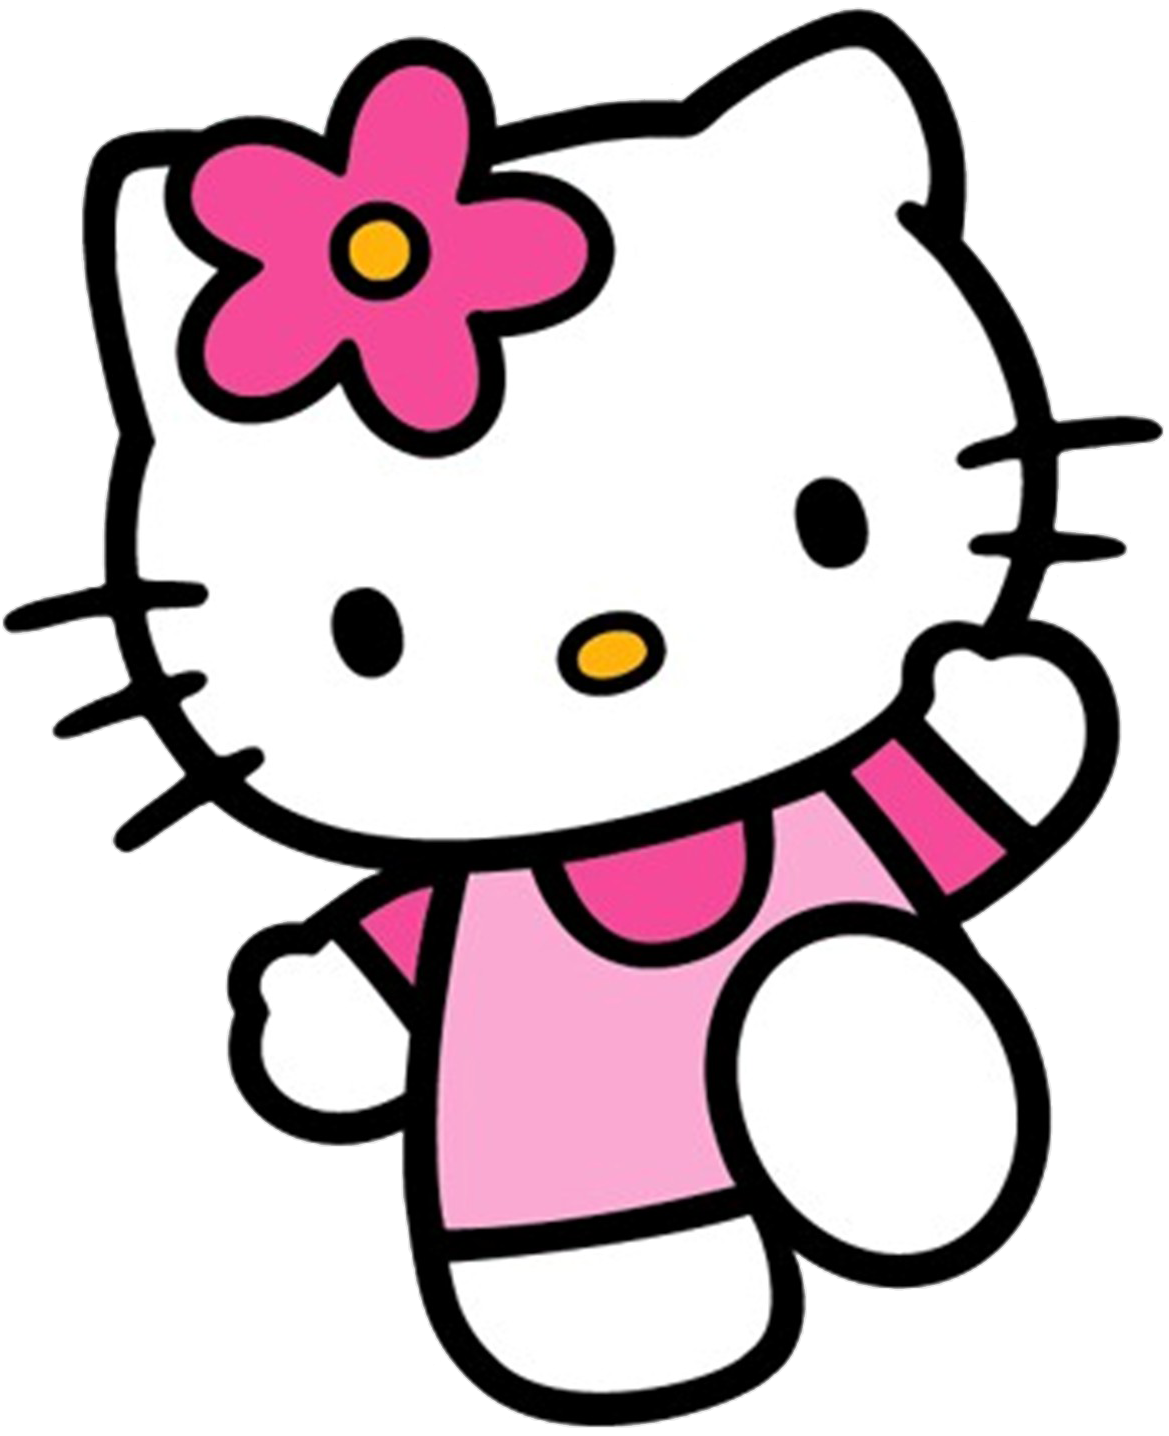 Free Hello Kitty Wallpapers For Computer - Wallpaper Cave